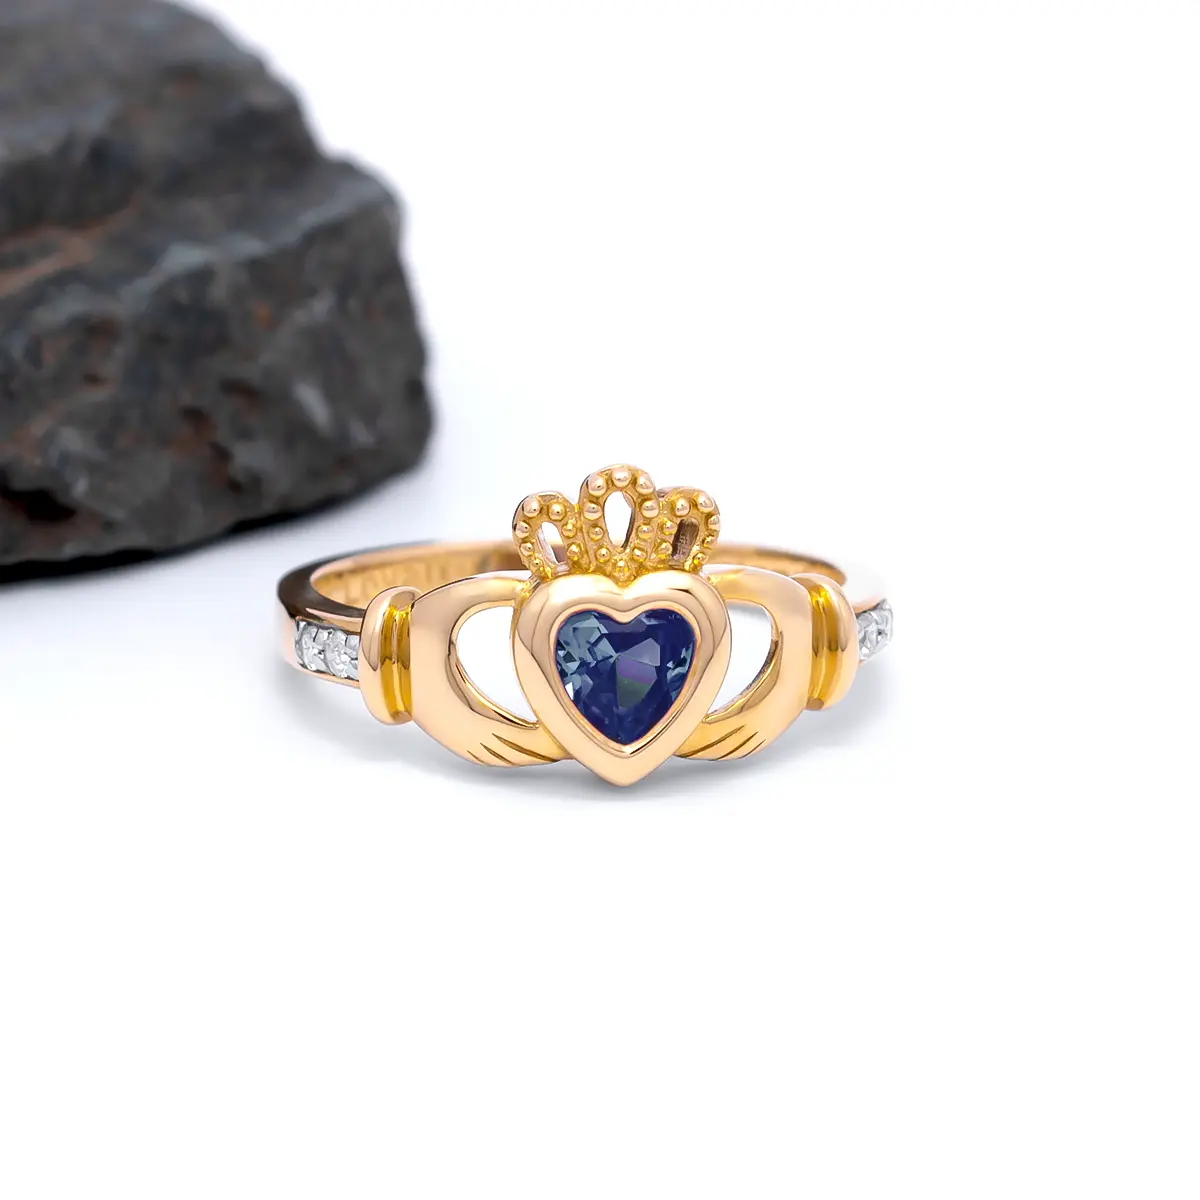 Add a classic touch to any outfit with this stunning blue sapphire ring!  Crafted with marcasite accents for a vintage aesthetic, this timeless September  birthstone ring is perfect for any occasion. –